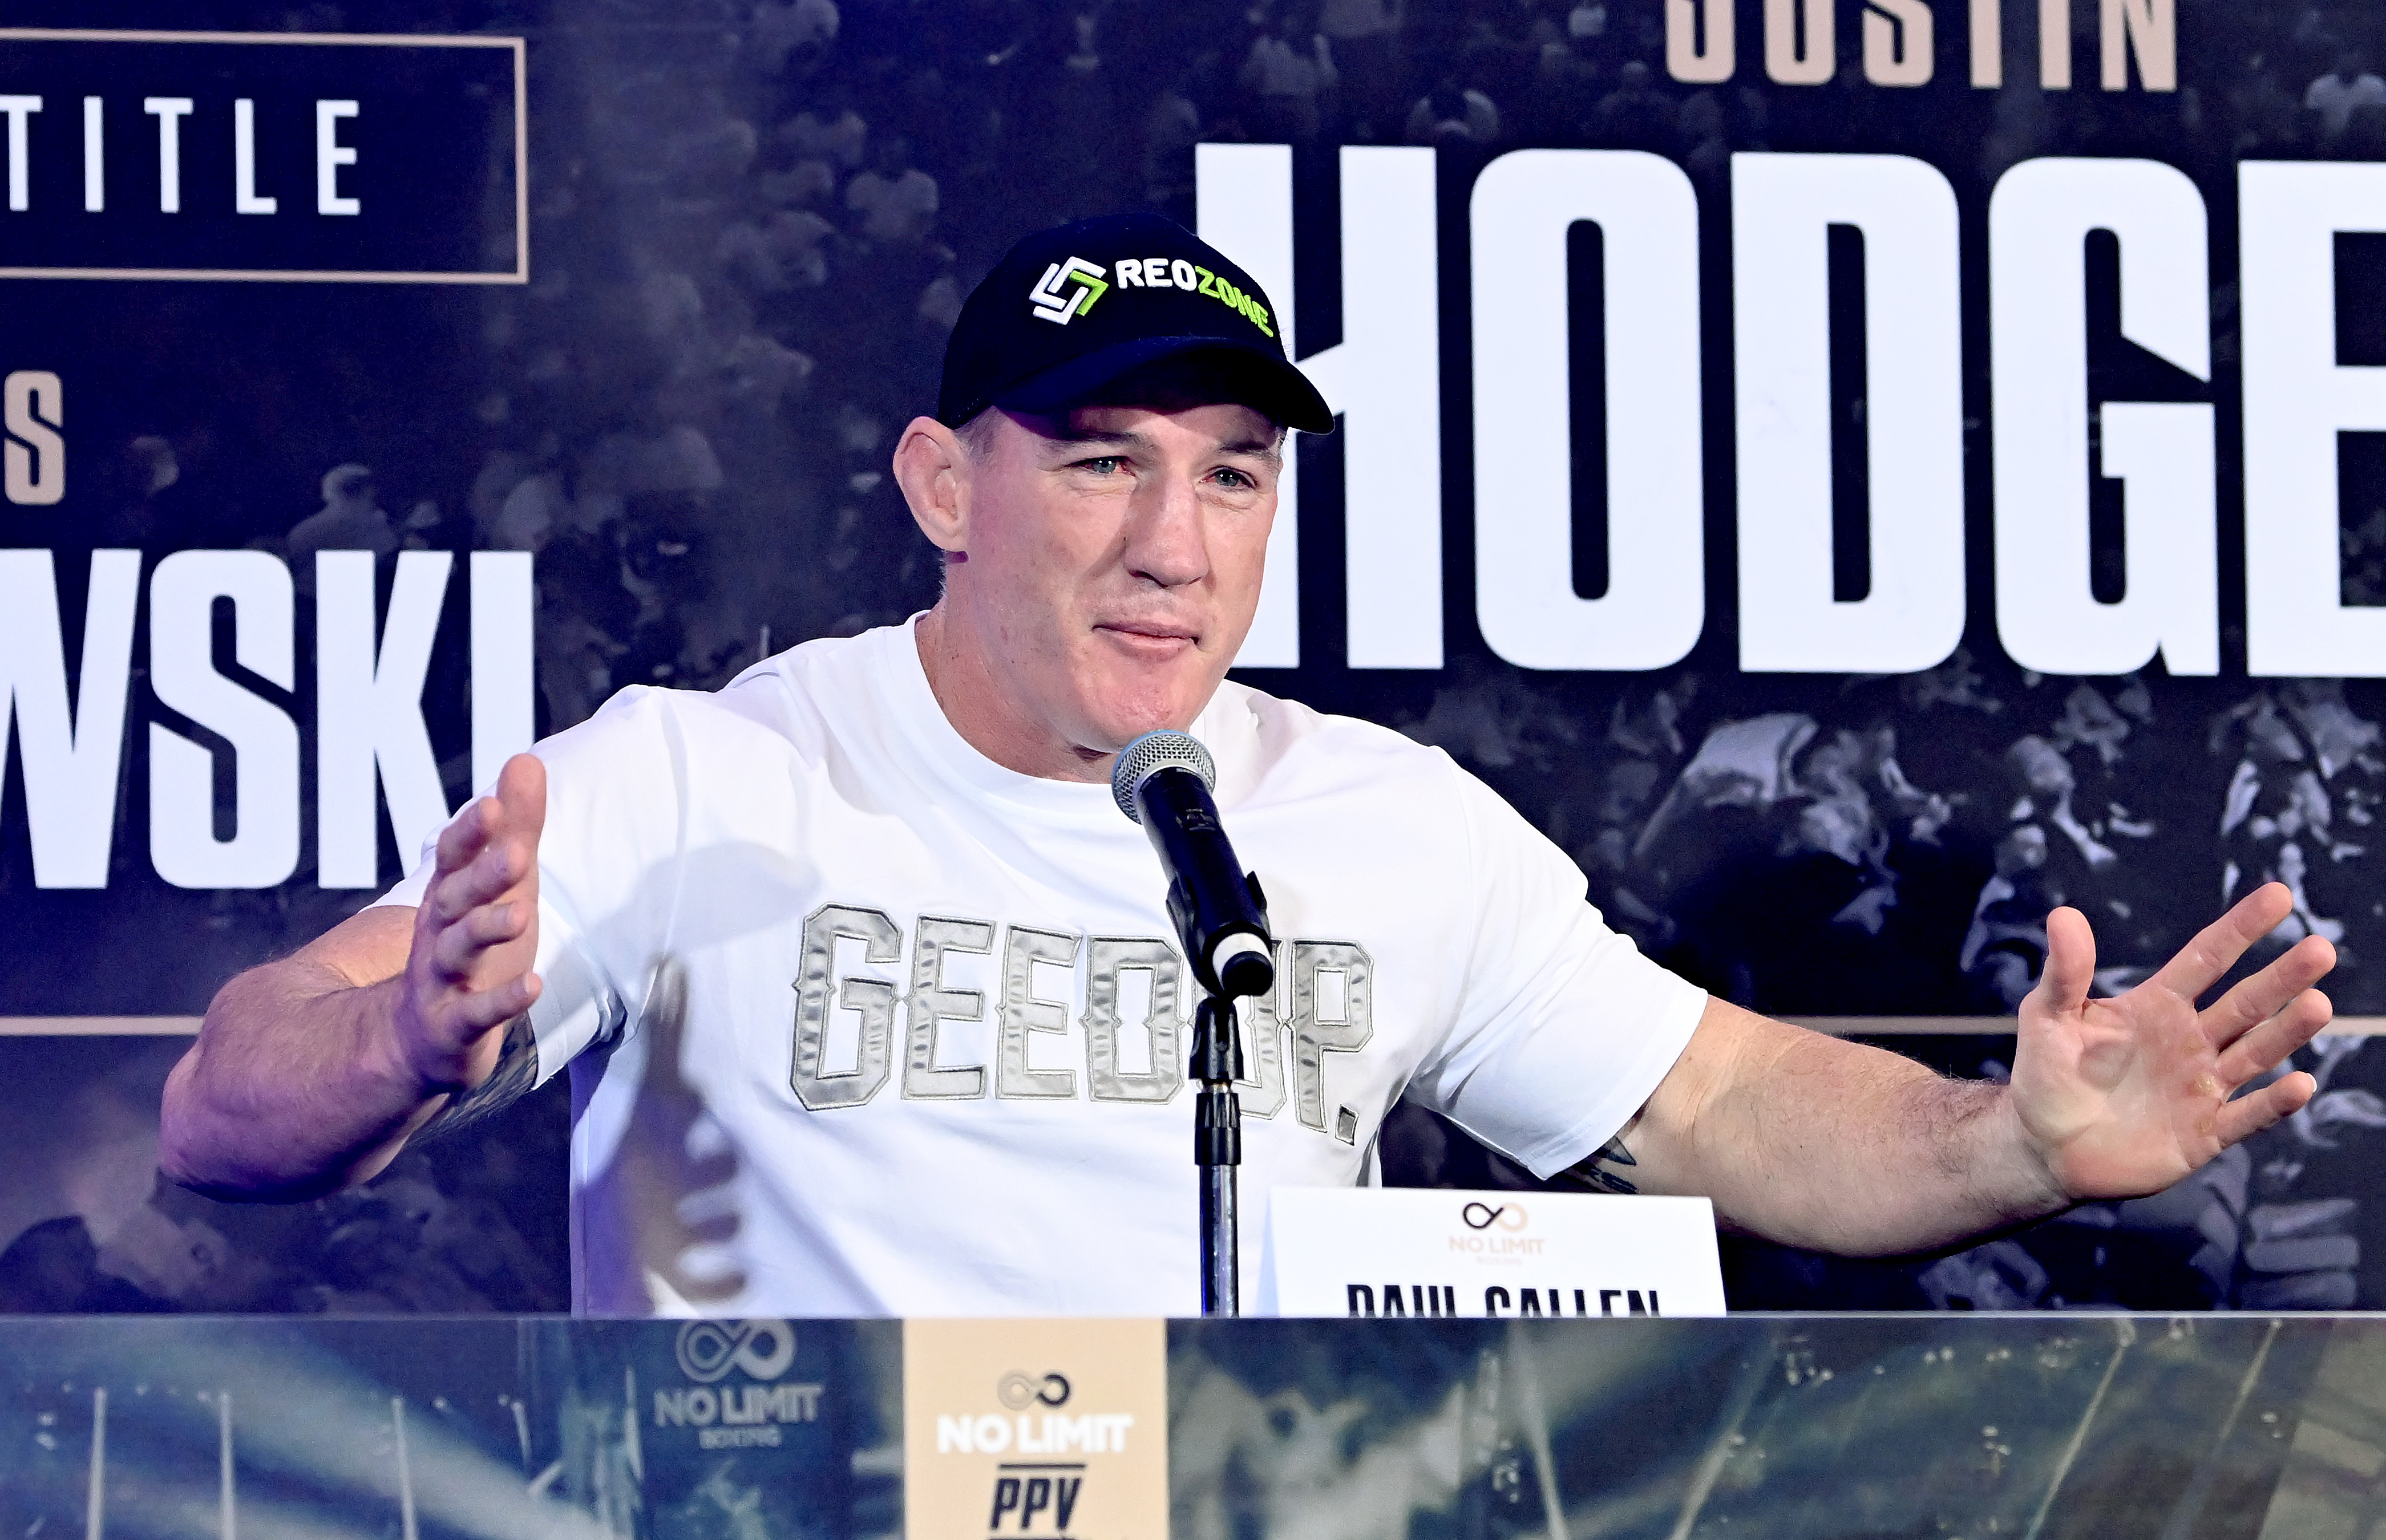 Paul Gallen speaks during a press conference announcing the fight against Justin Hodges and Ben Hannant.